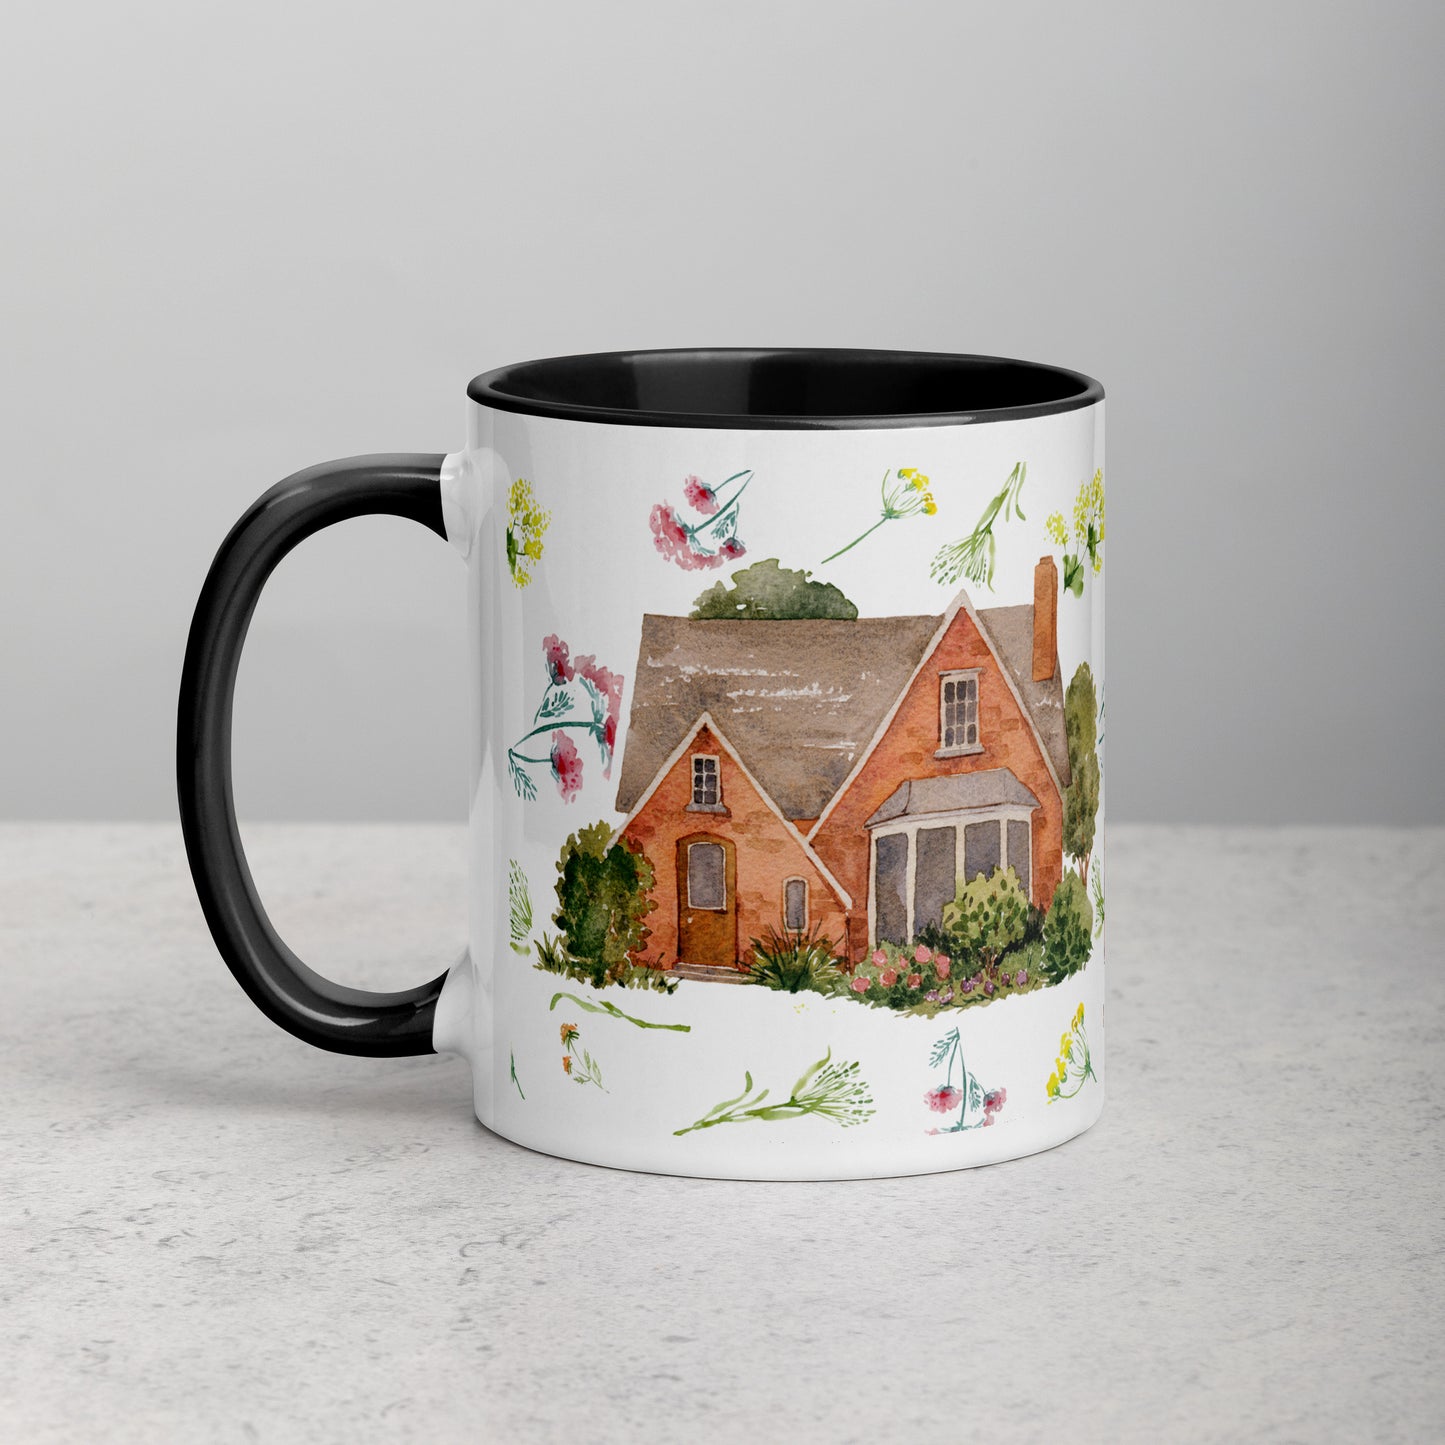 Time for Tea and Cozy Murder Mysteries Cute Bookish Mug